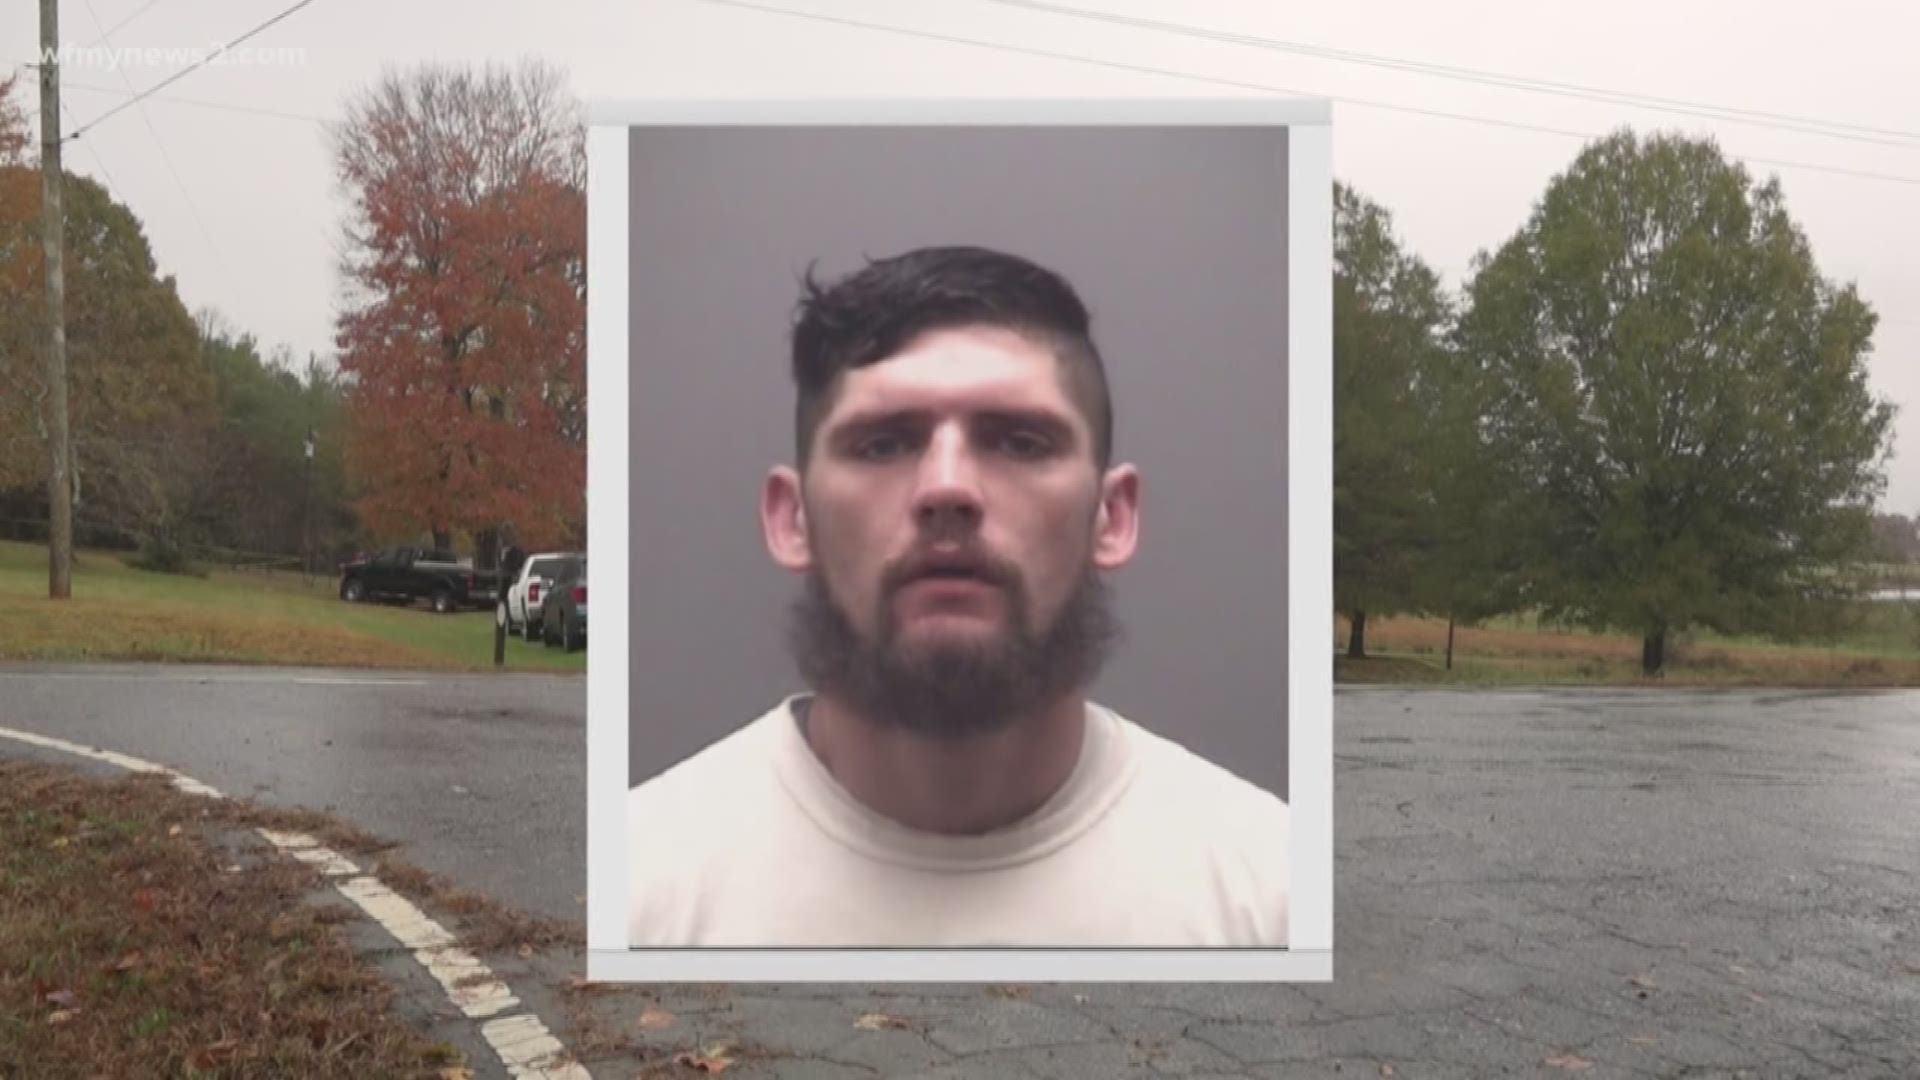 Deputies say 31-year-old, Justin Lynn Ramirez was taken back to the Alamance County Sheriff's Office for questioning.